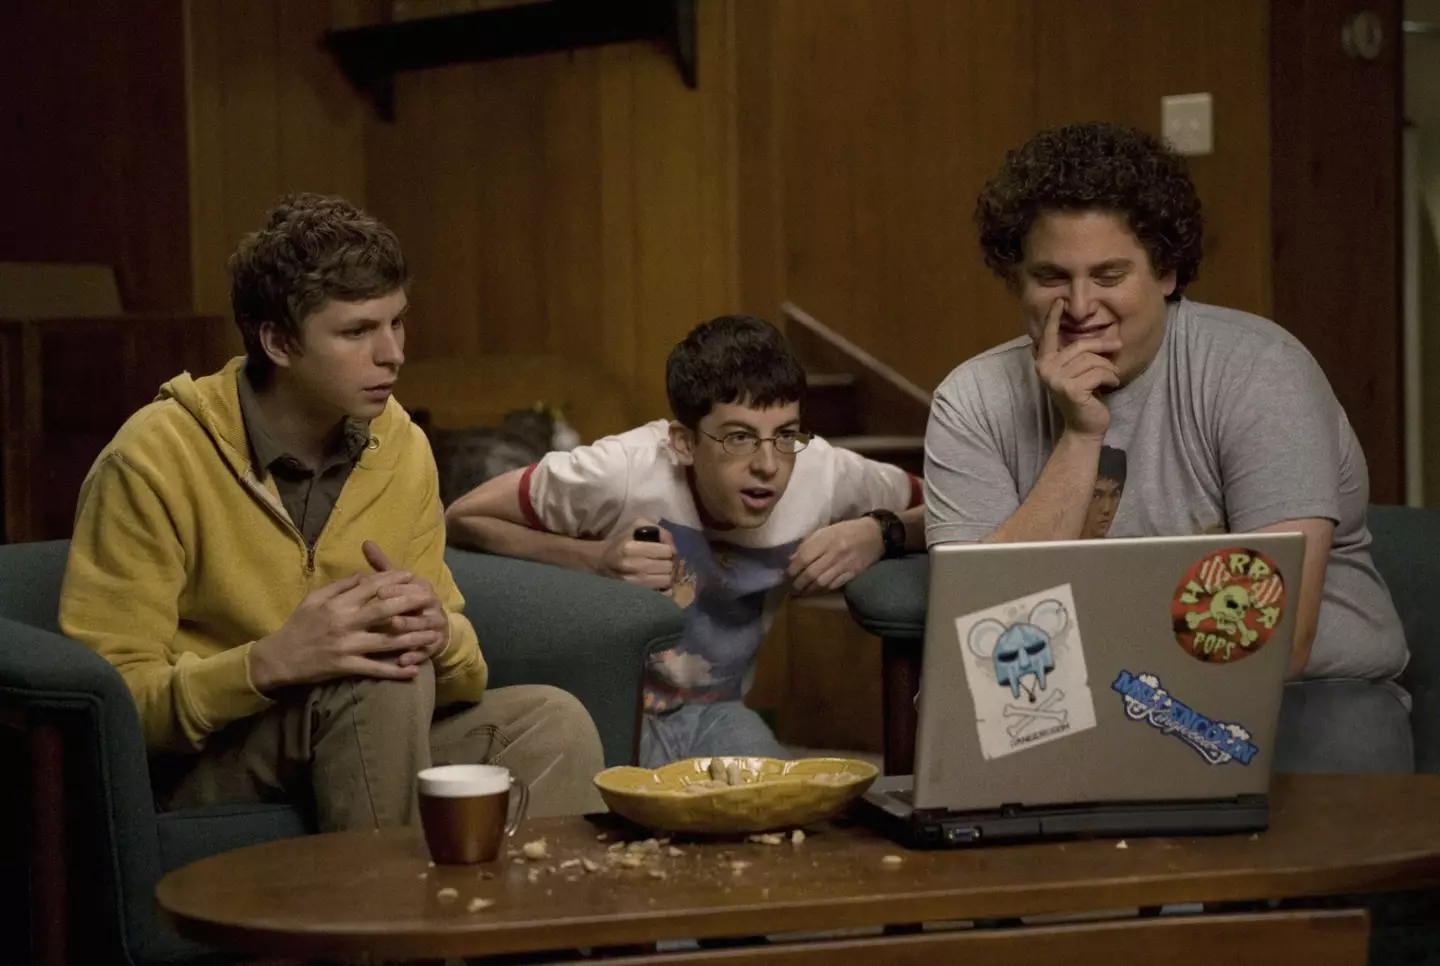 Jonah Hill starred alongside Michael Cera and Christopher Mintz-Plasse in the cult classic.